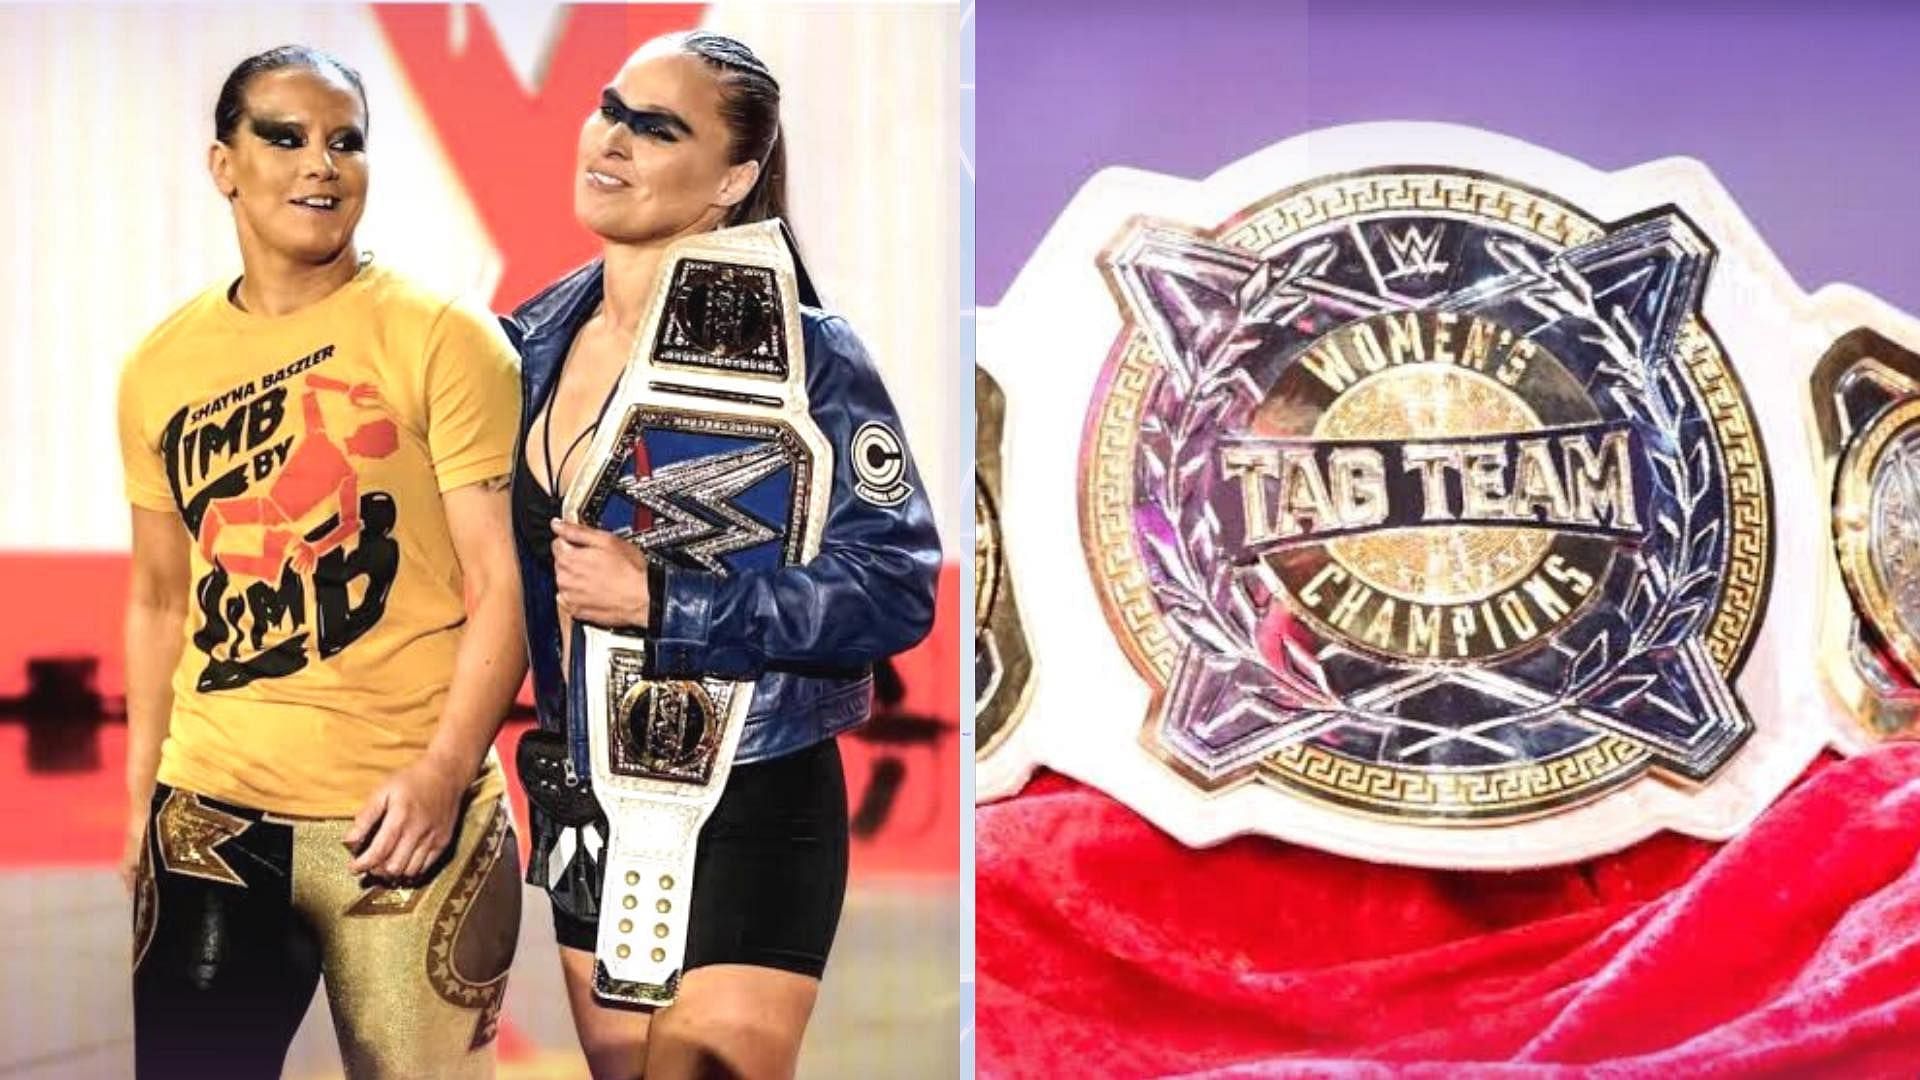 The team of Ronda Rousey and Shayna Baszler are close to winning their first Women